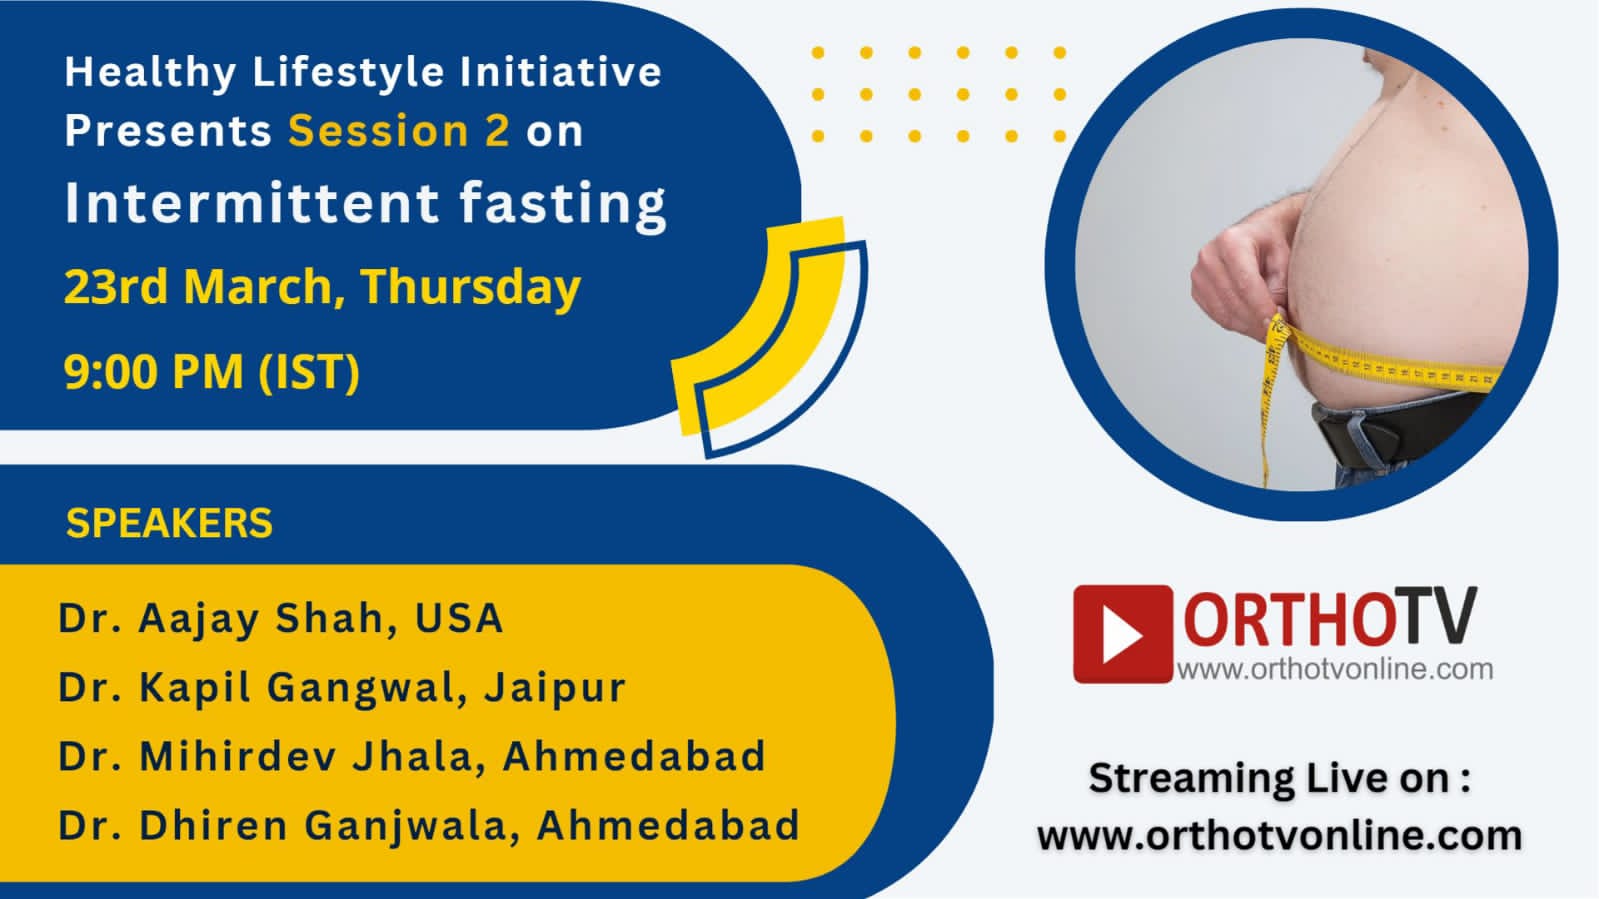 Healthy Lifestyle Initiative Presents Session 2 on Intermittent fasting